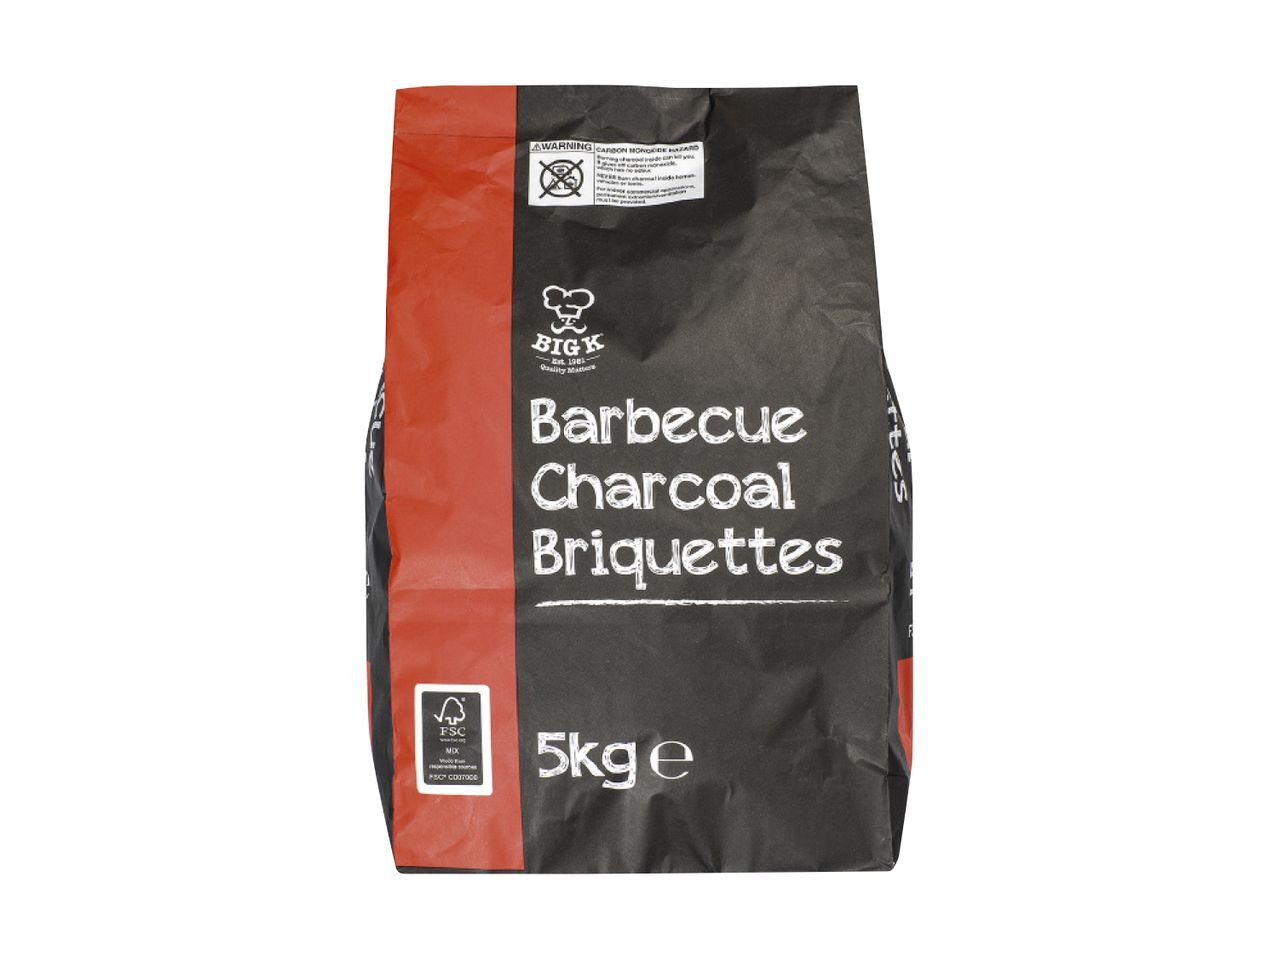 Go to full screen view: Big K Barbeque Charcoal Briquettes - Image 1